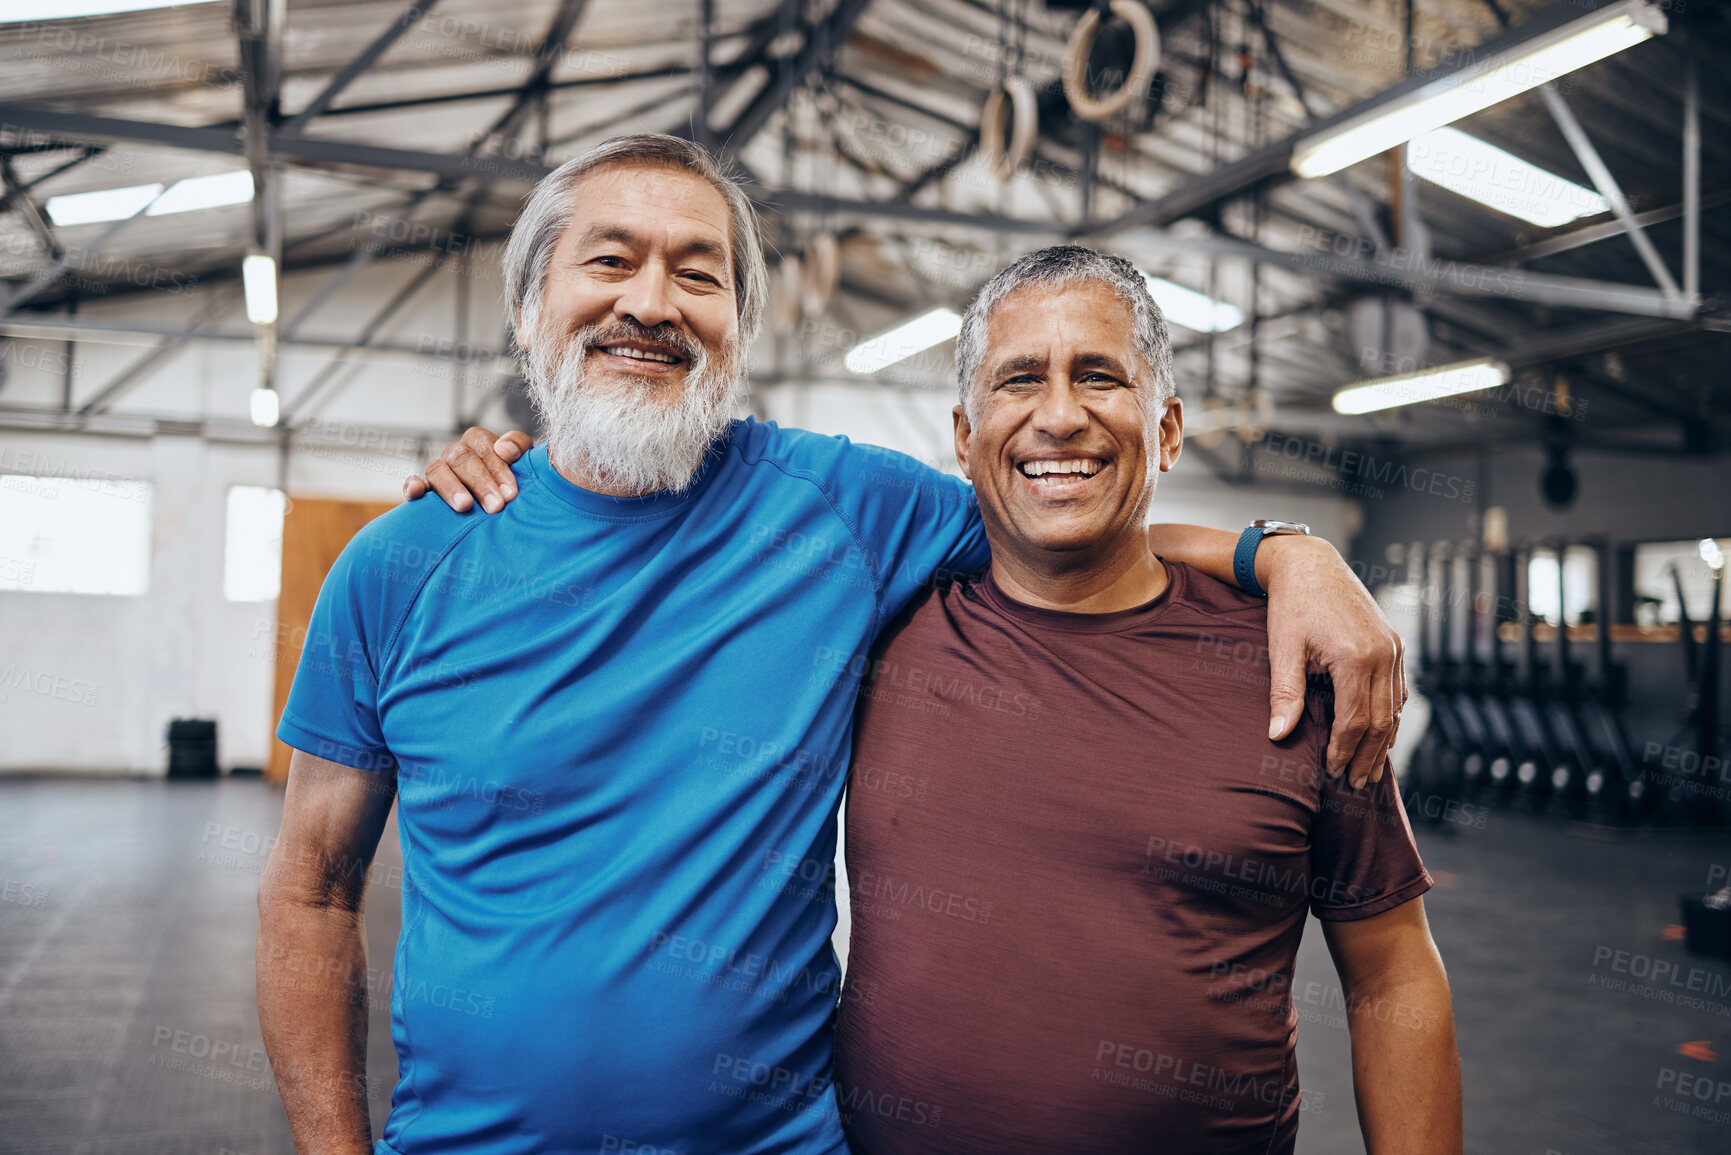 Buy stock photo Senior men smile, gym portrait and teamwork motivation for diversity, friends hug or happiness for wellness. Elderly fitness partnership, asian and black man at mma workout, exercise or team building